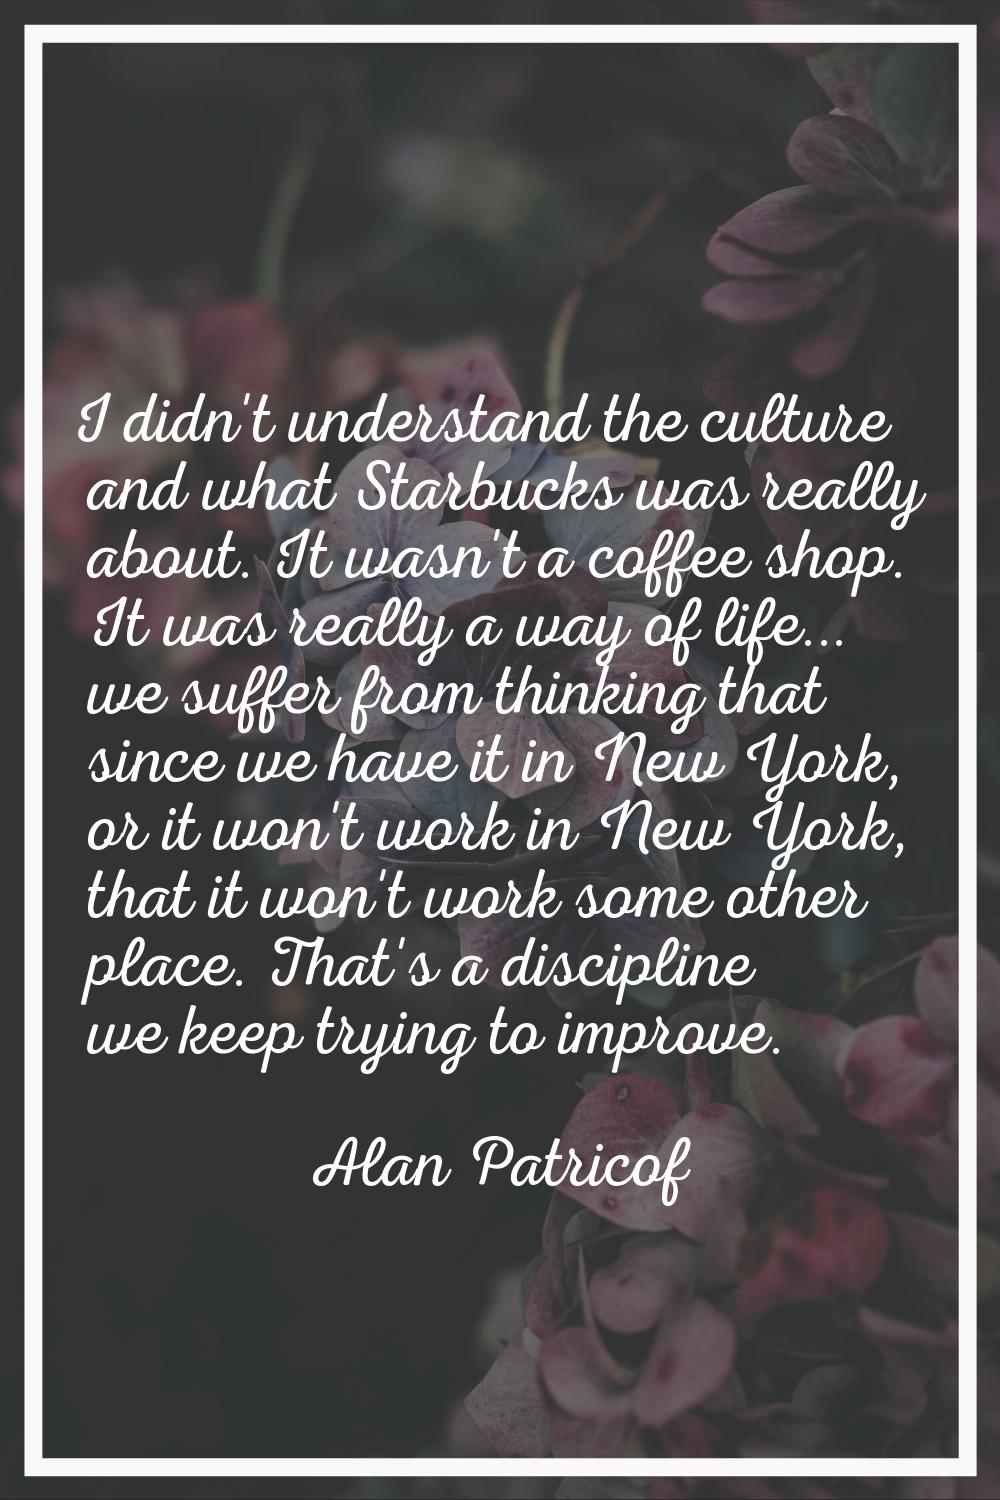 I didn't understand the culture and what Starbucks was really about. It wasn't a coffee shop. It wa